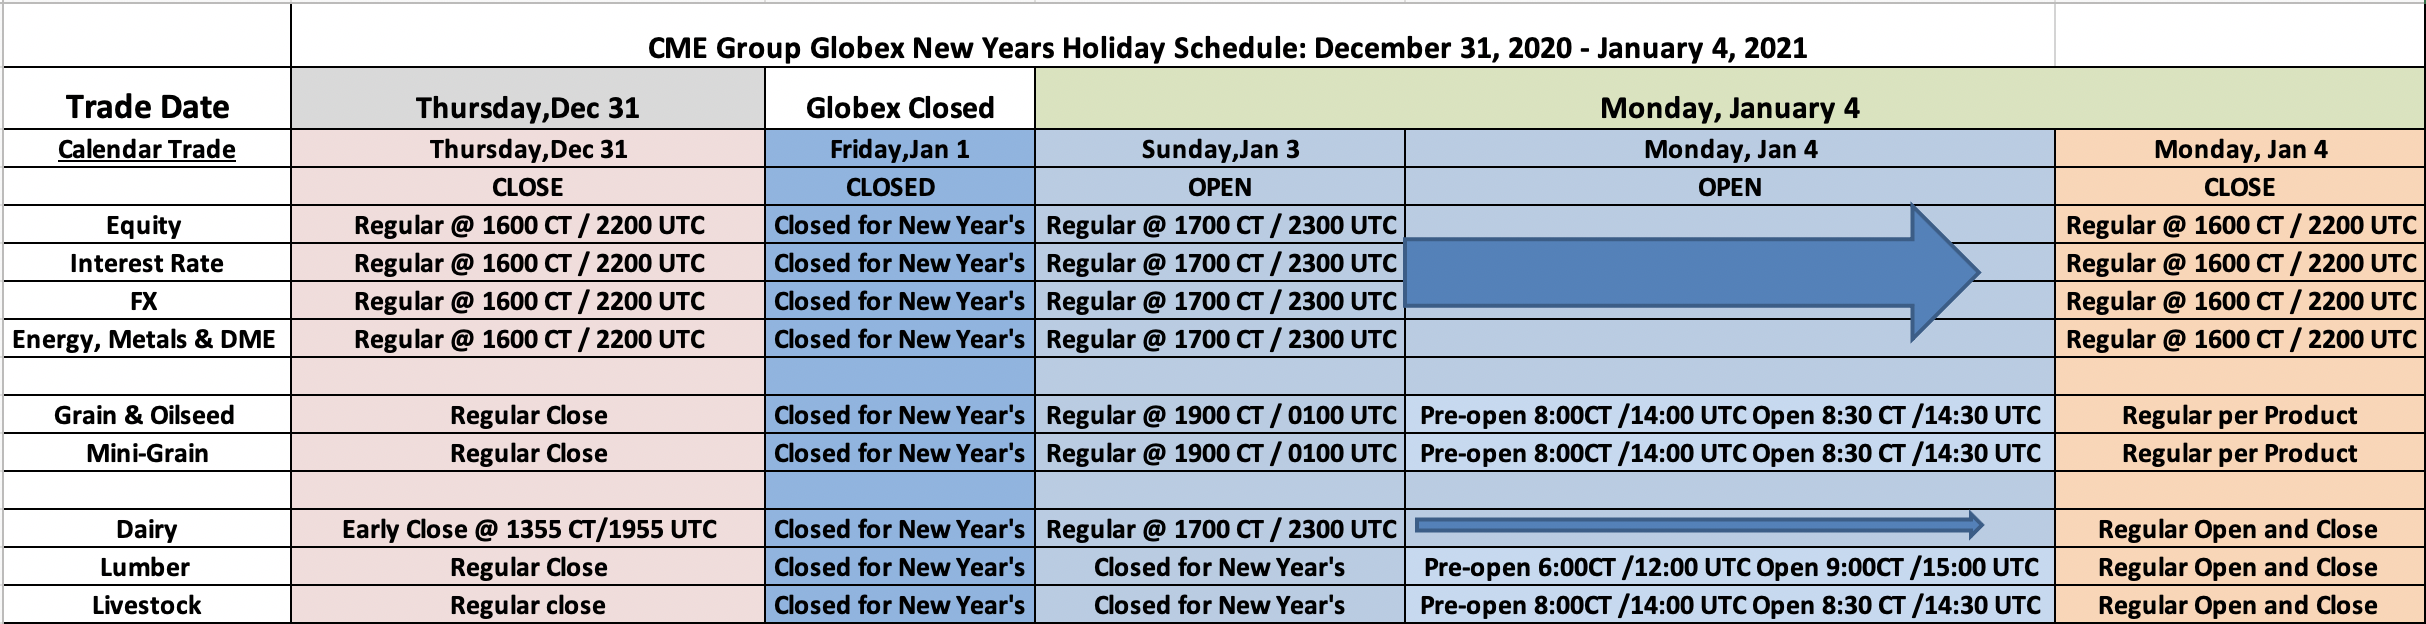 Forex holiday schedule investing newsweek best